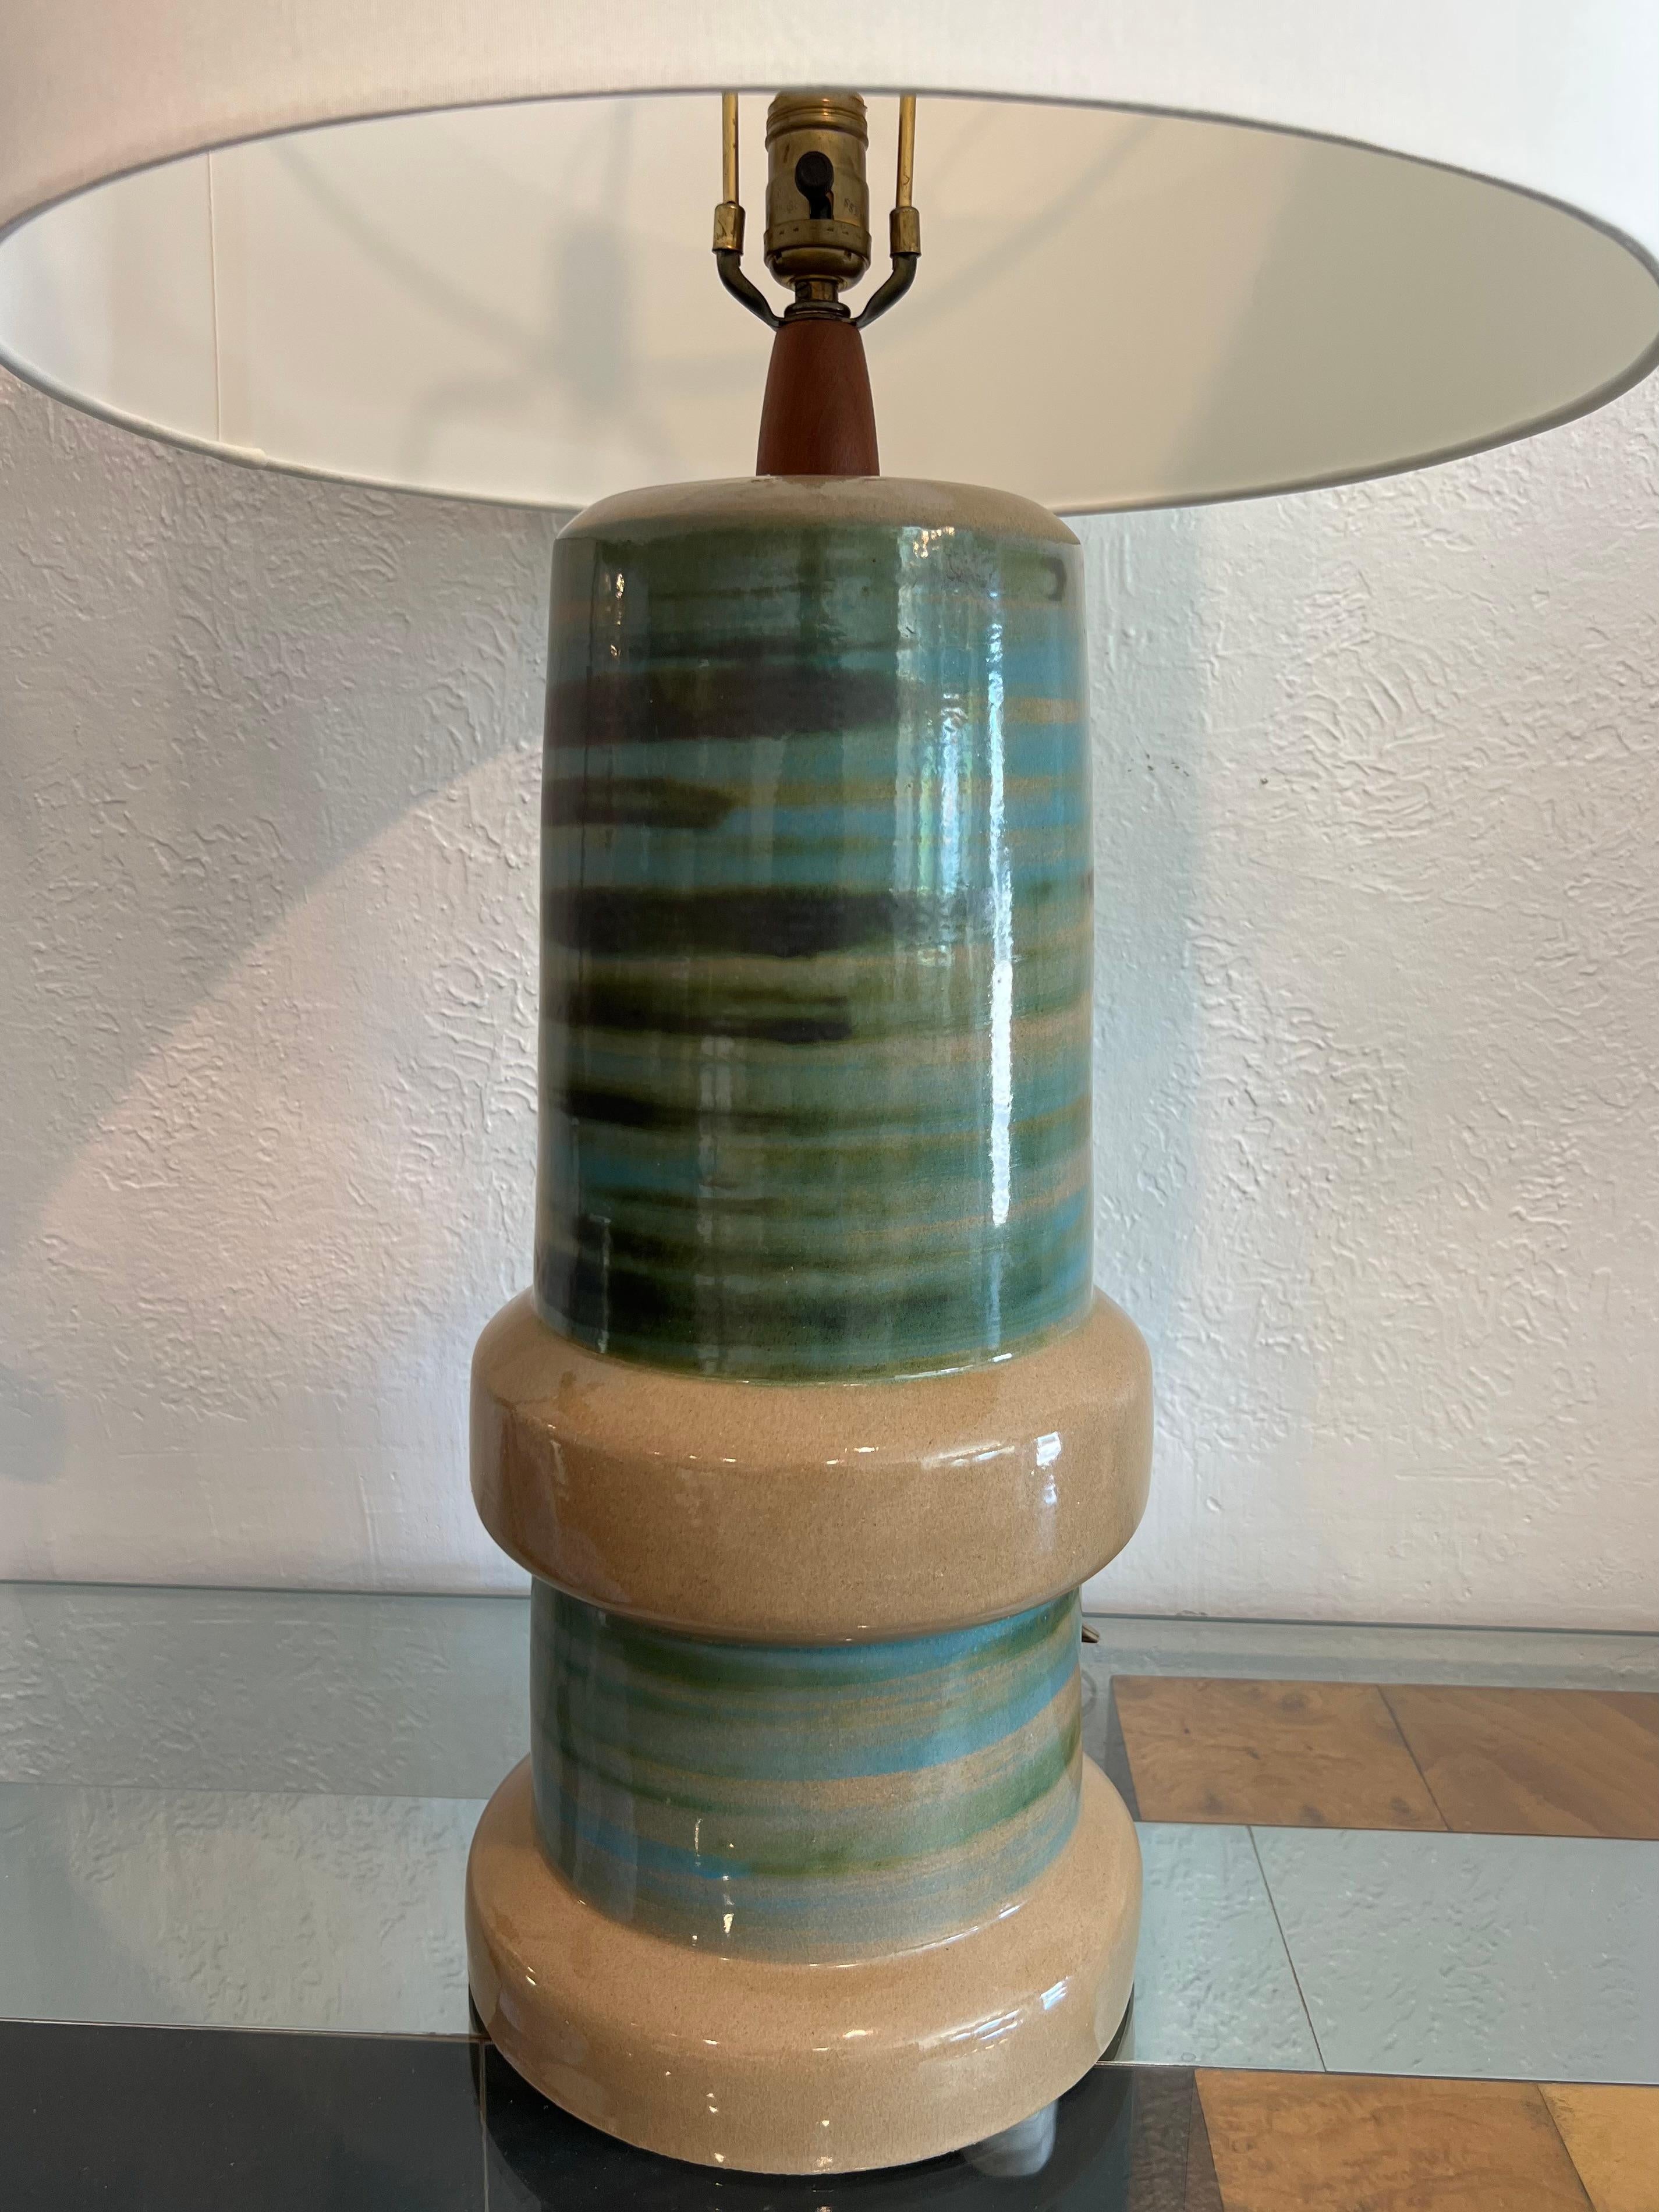 Monumental Jane and Gordon Martz ceramic table lamp. Fitted with a new drum shade. Original socket and wiring (please refer to photos). Additional photos available upon request. 

Overall measurements: 36H 19 3/4D
Ceramic portion: 21H 10D

Would